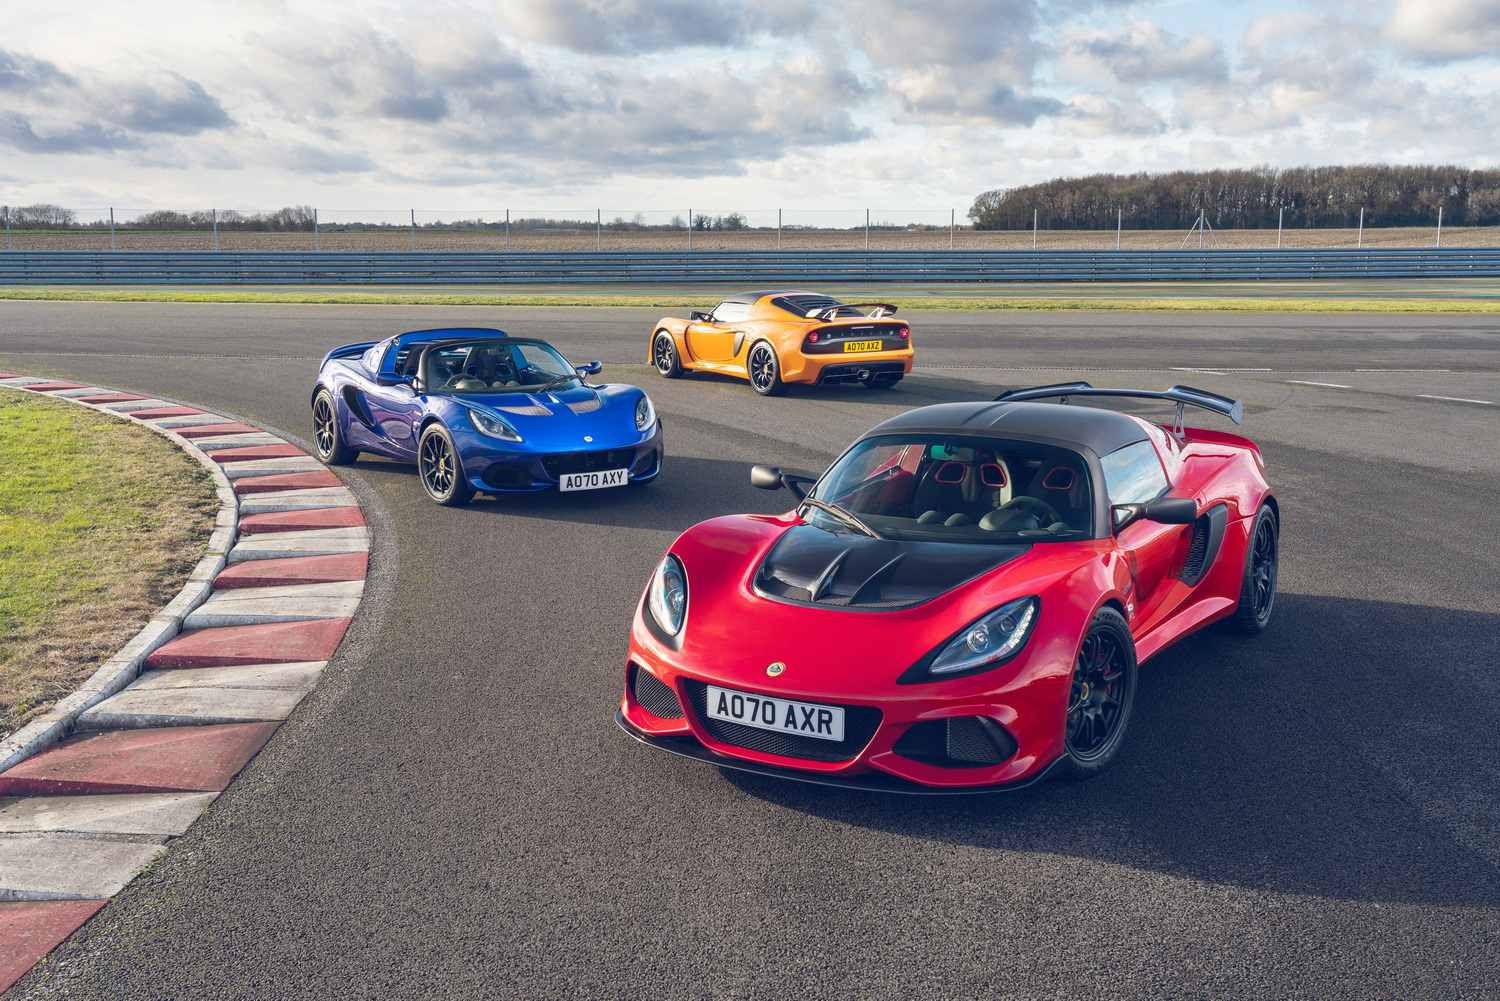 Lotus legends bow out in style. Image by Lotus.